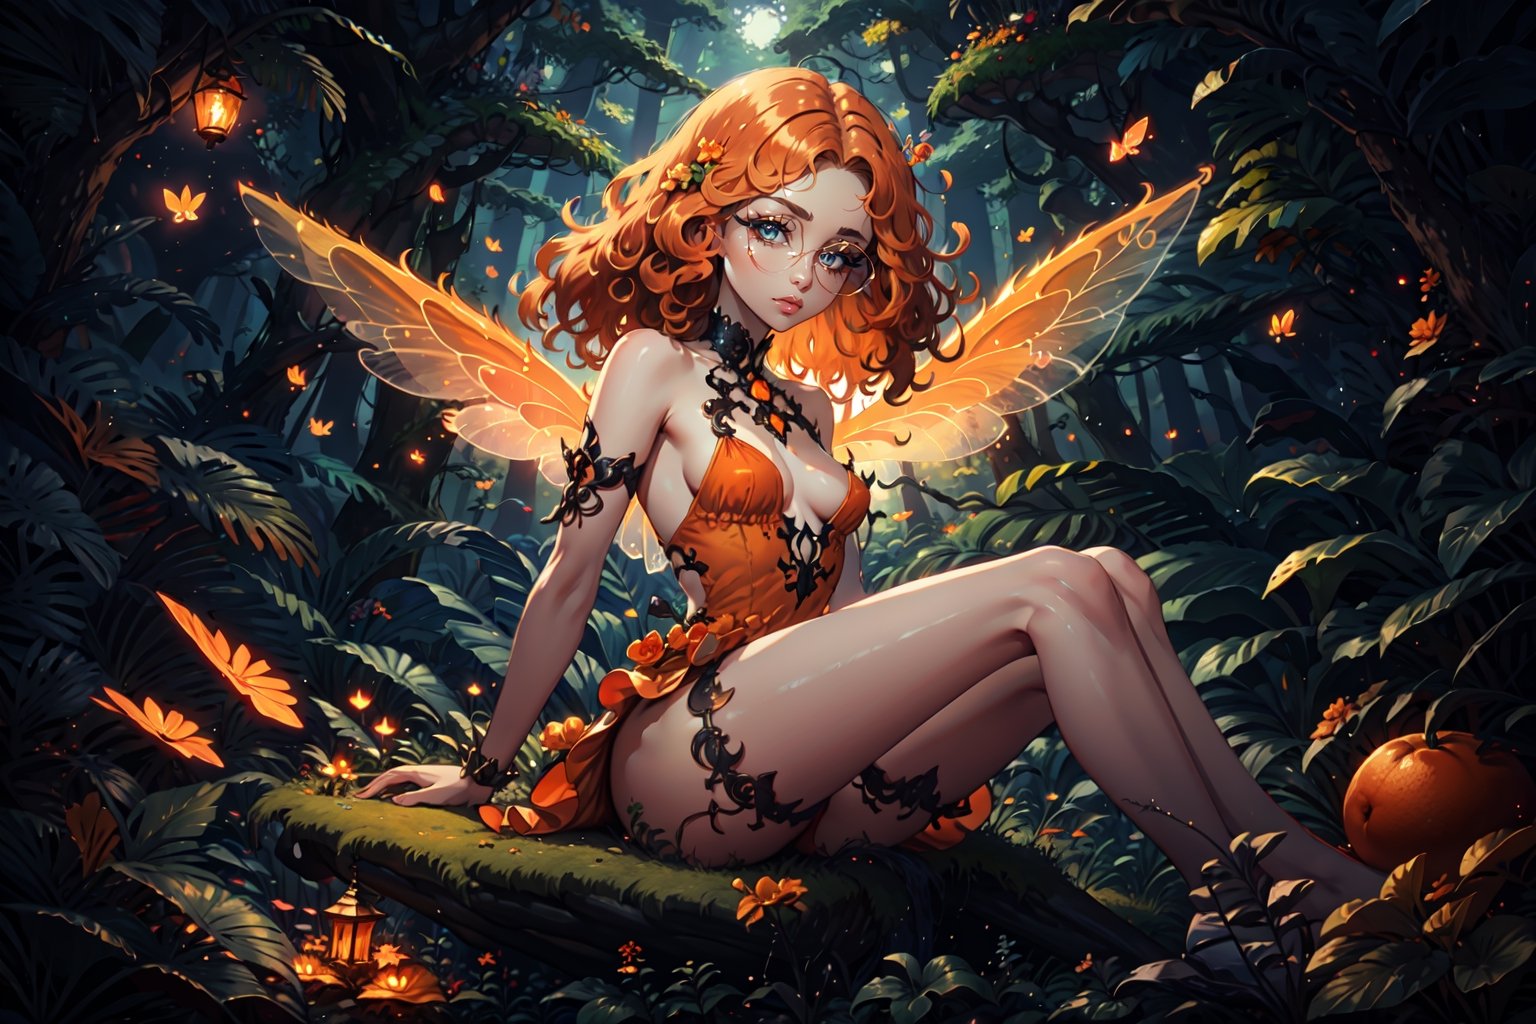 Fairy with green eyes, with round glasses and curly orange hair, with a short body-length dress, a little bit sexy, like that of a fairy and orange in color, with transparent wings like those of an insect sitting in a background forest, long hair, curly hair, perfect legs, orange dress, sitting, pale skin, fair skin,

Magic Forest, 1 girl